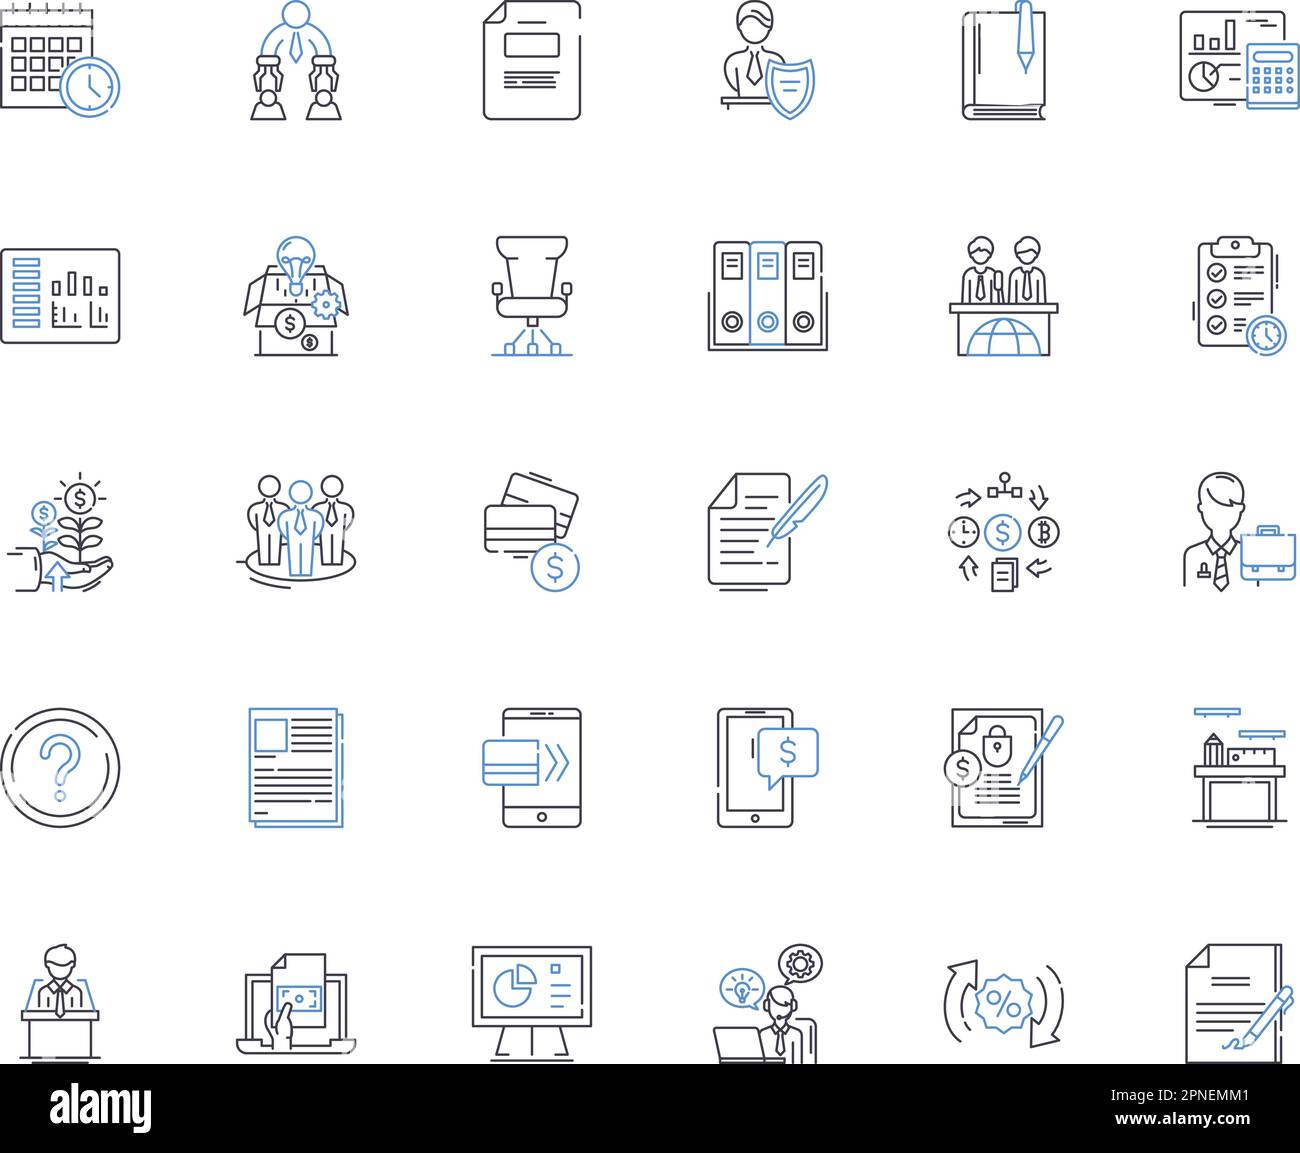 Accounting principles line icons collection. Assets, Liabilities, Equity, Revenue, Expenses, Cost, Financial Statements vector and linear illustration Stock Vector